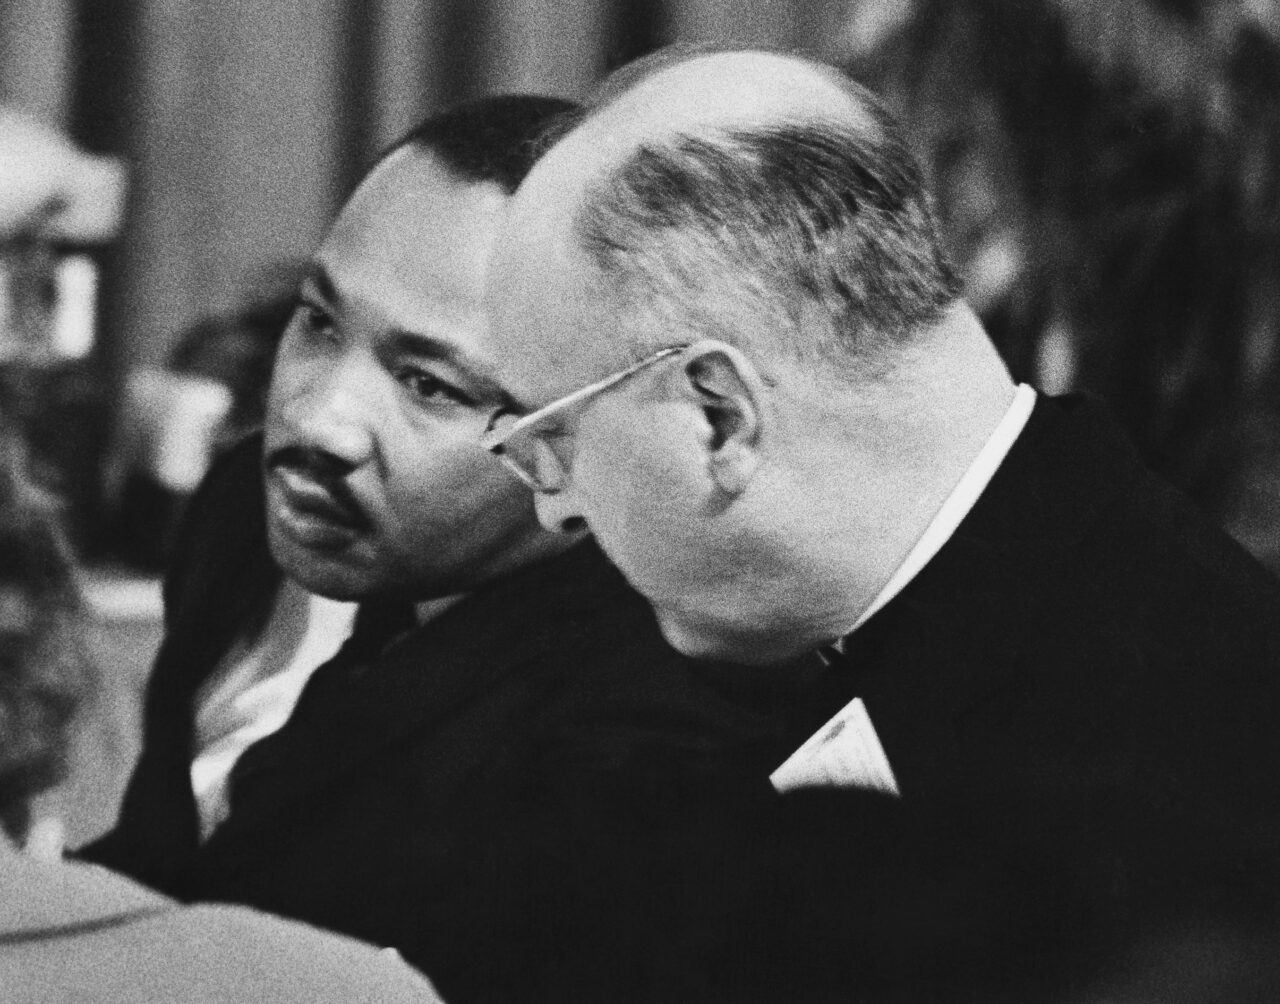 Martin Luther King Jr. at the Illinois Rally for Civil Rights